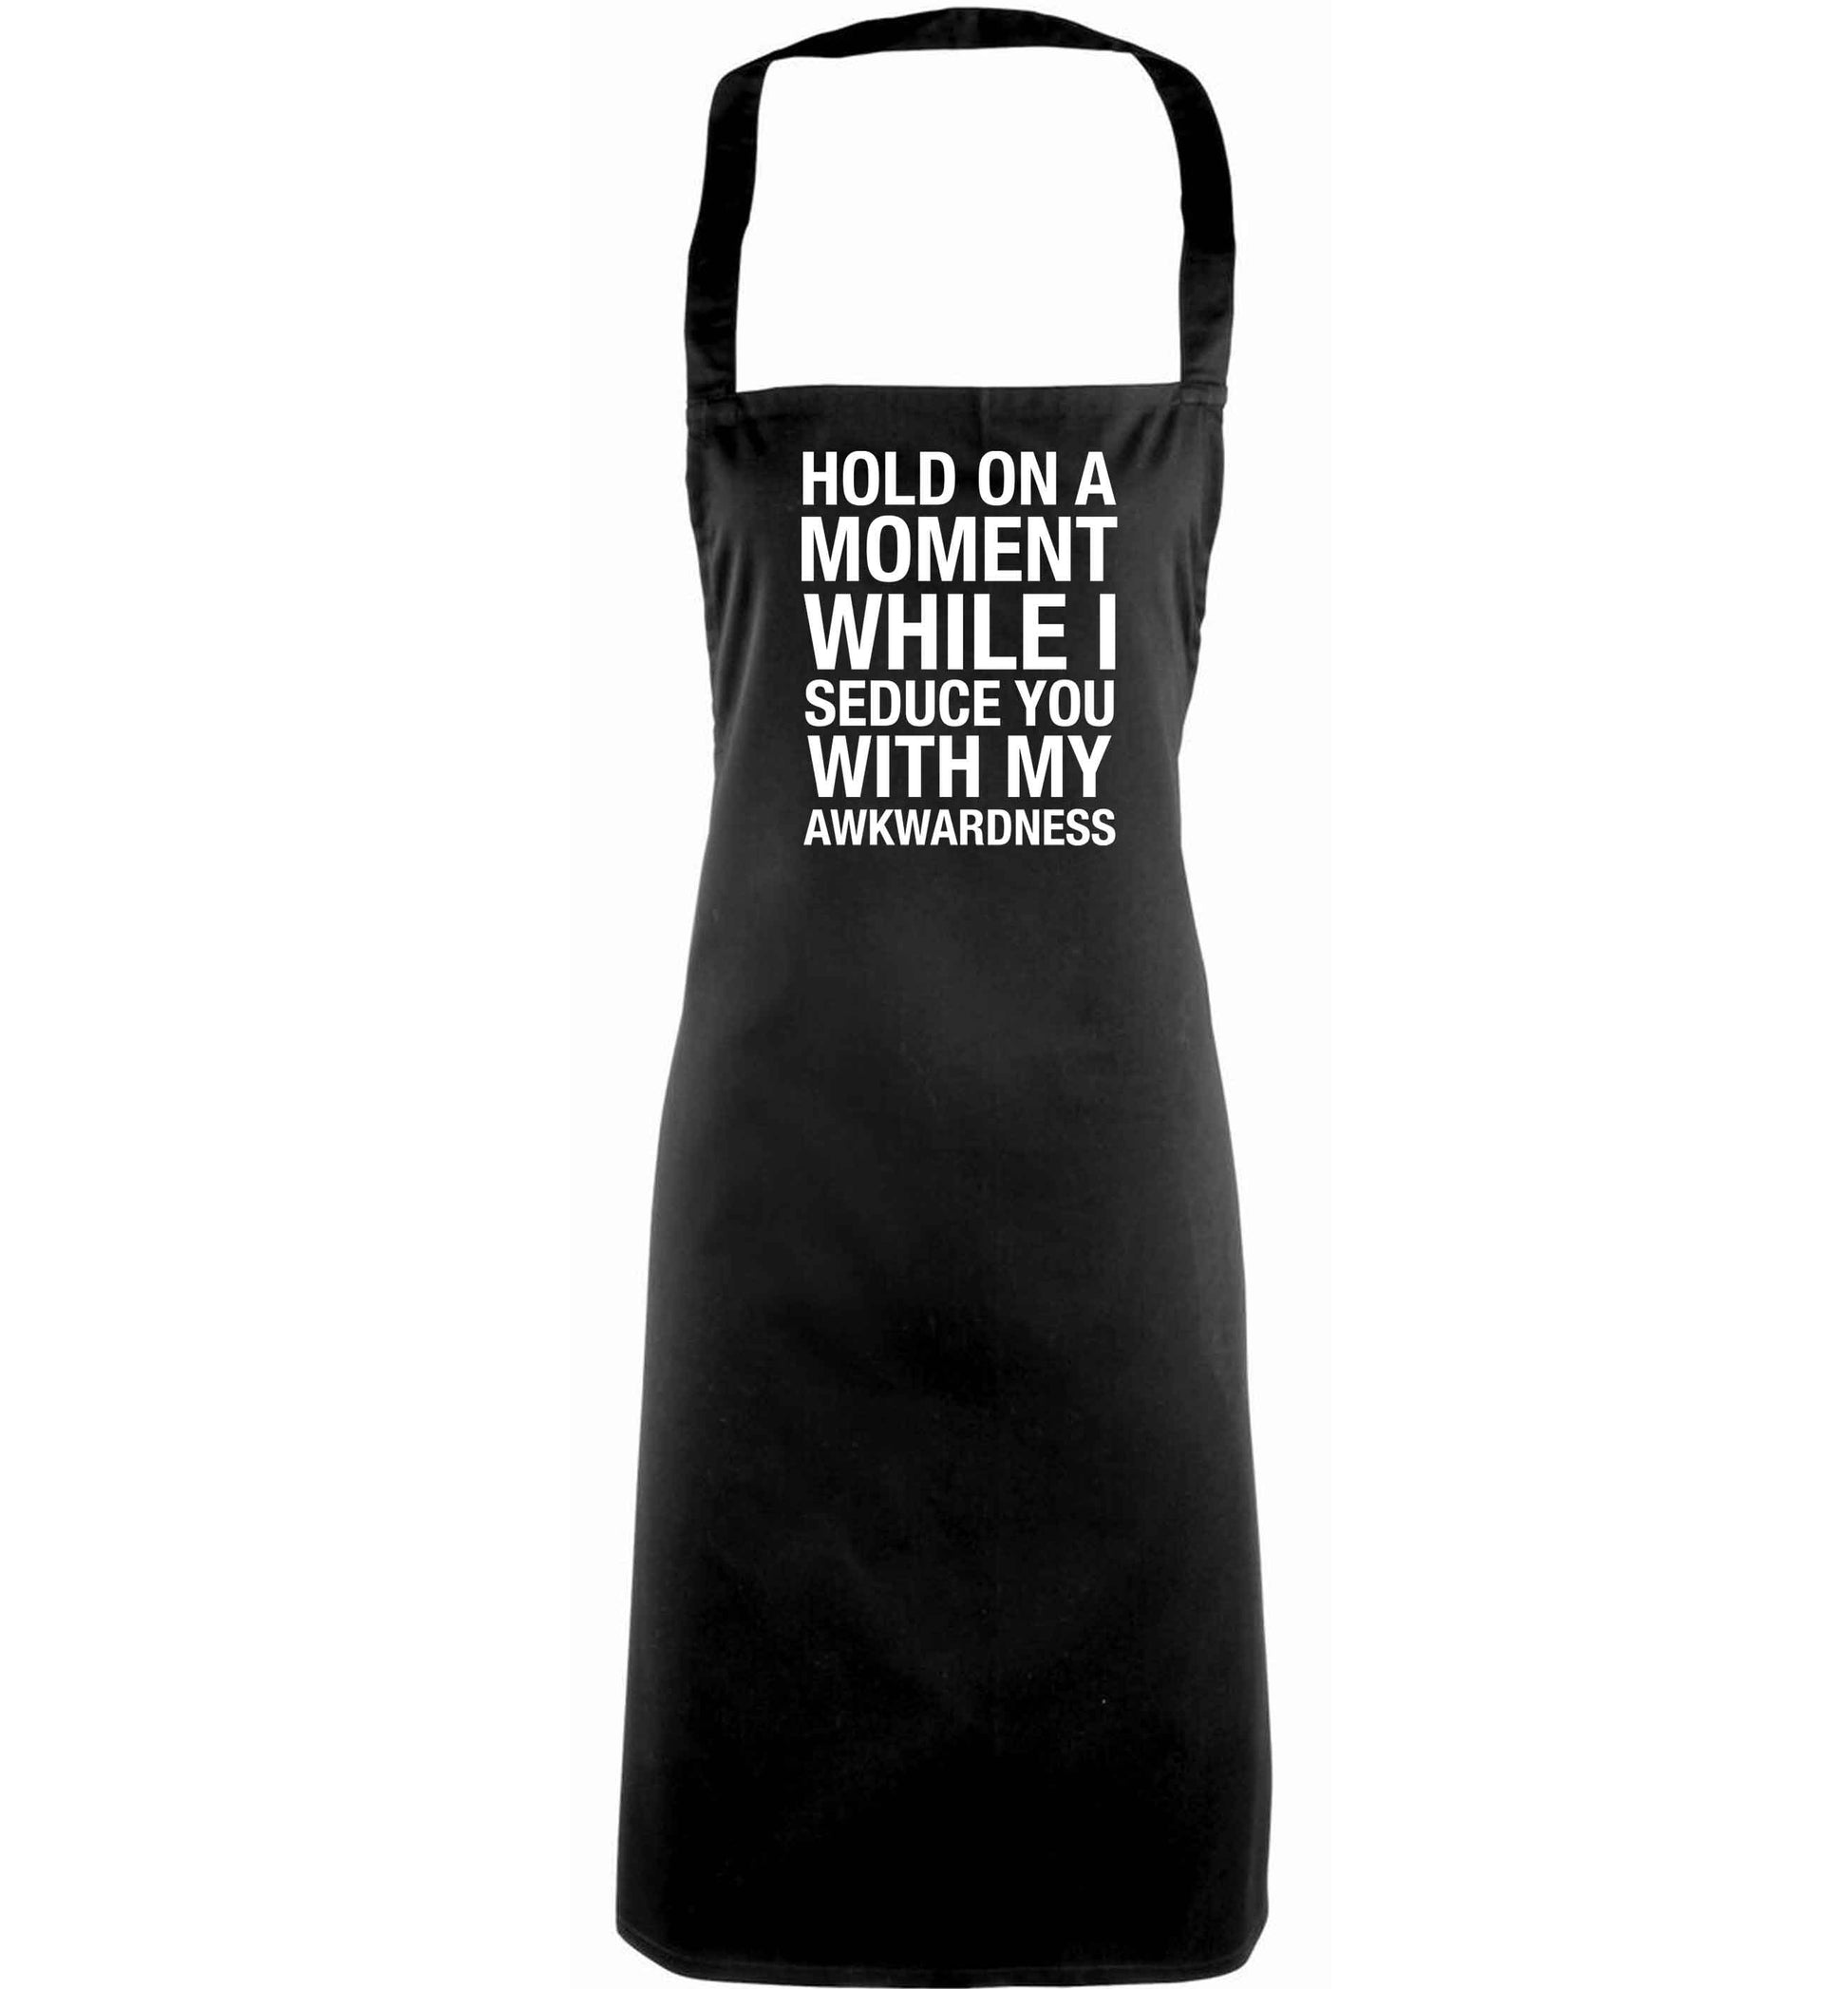 Hold on a moment while I seduce you with my awkwardness adults black apron